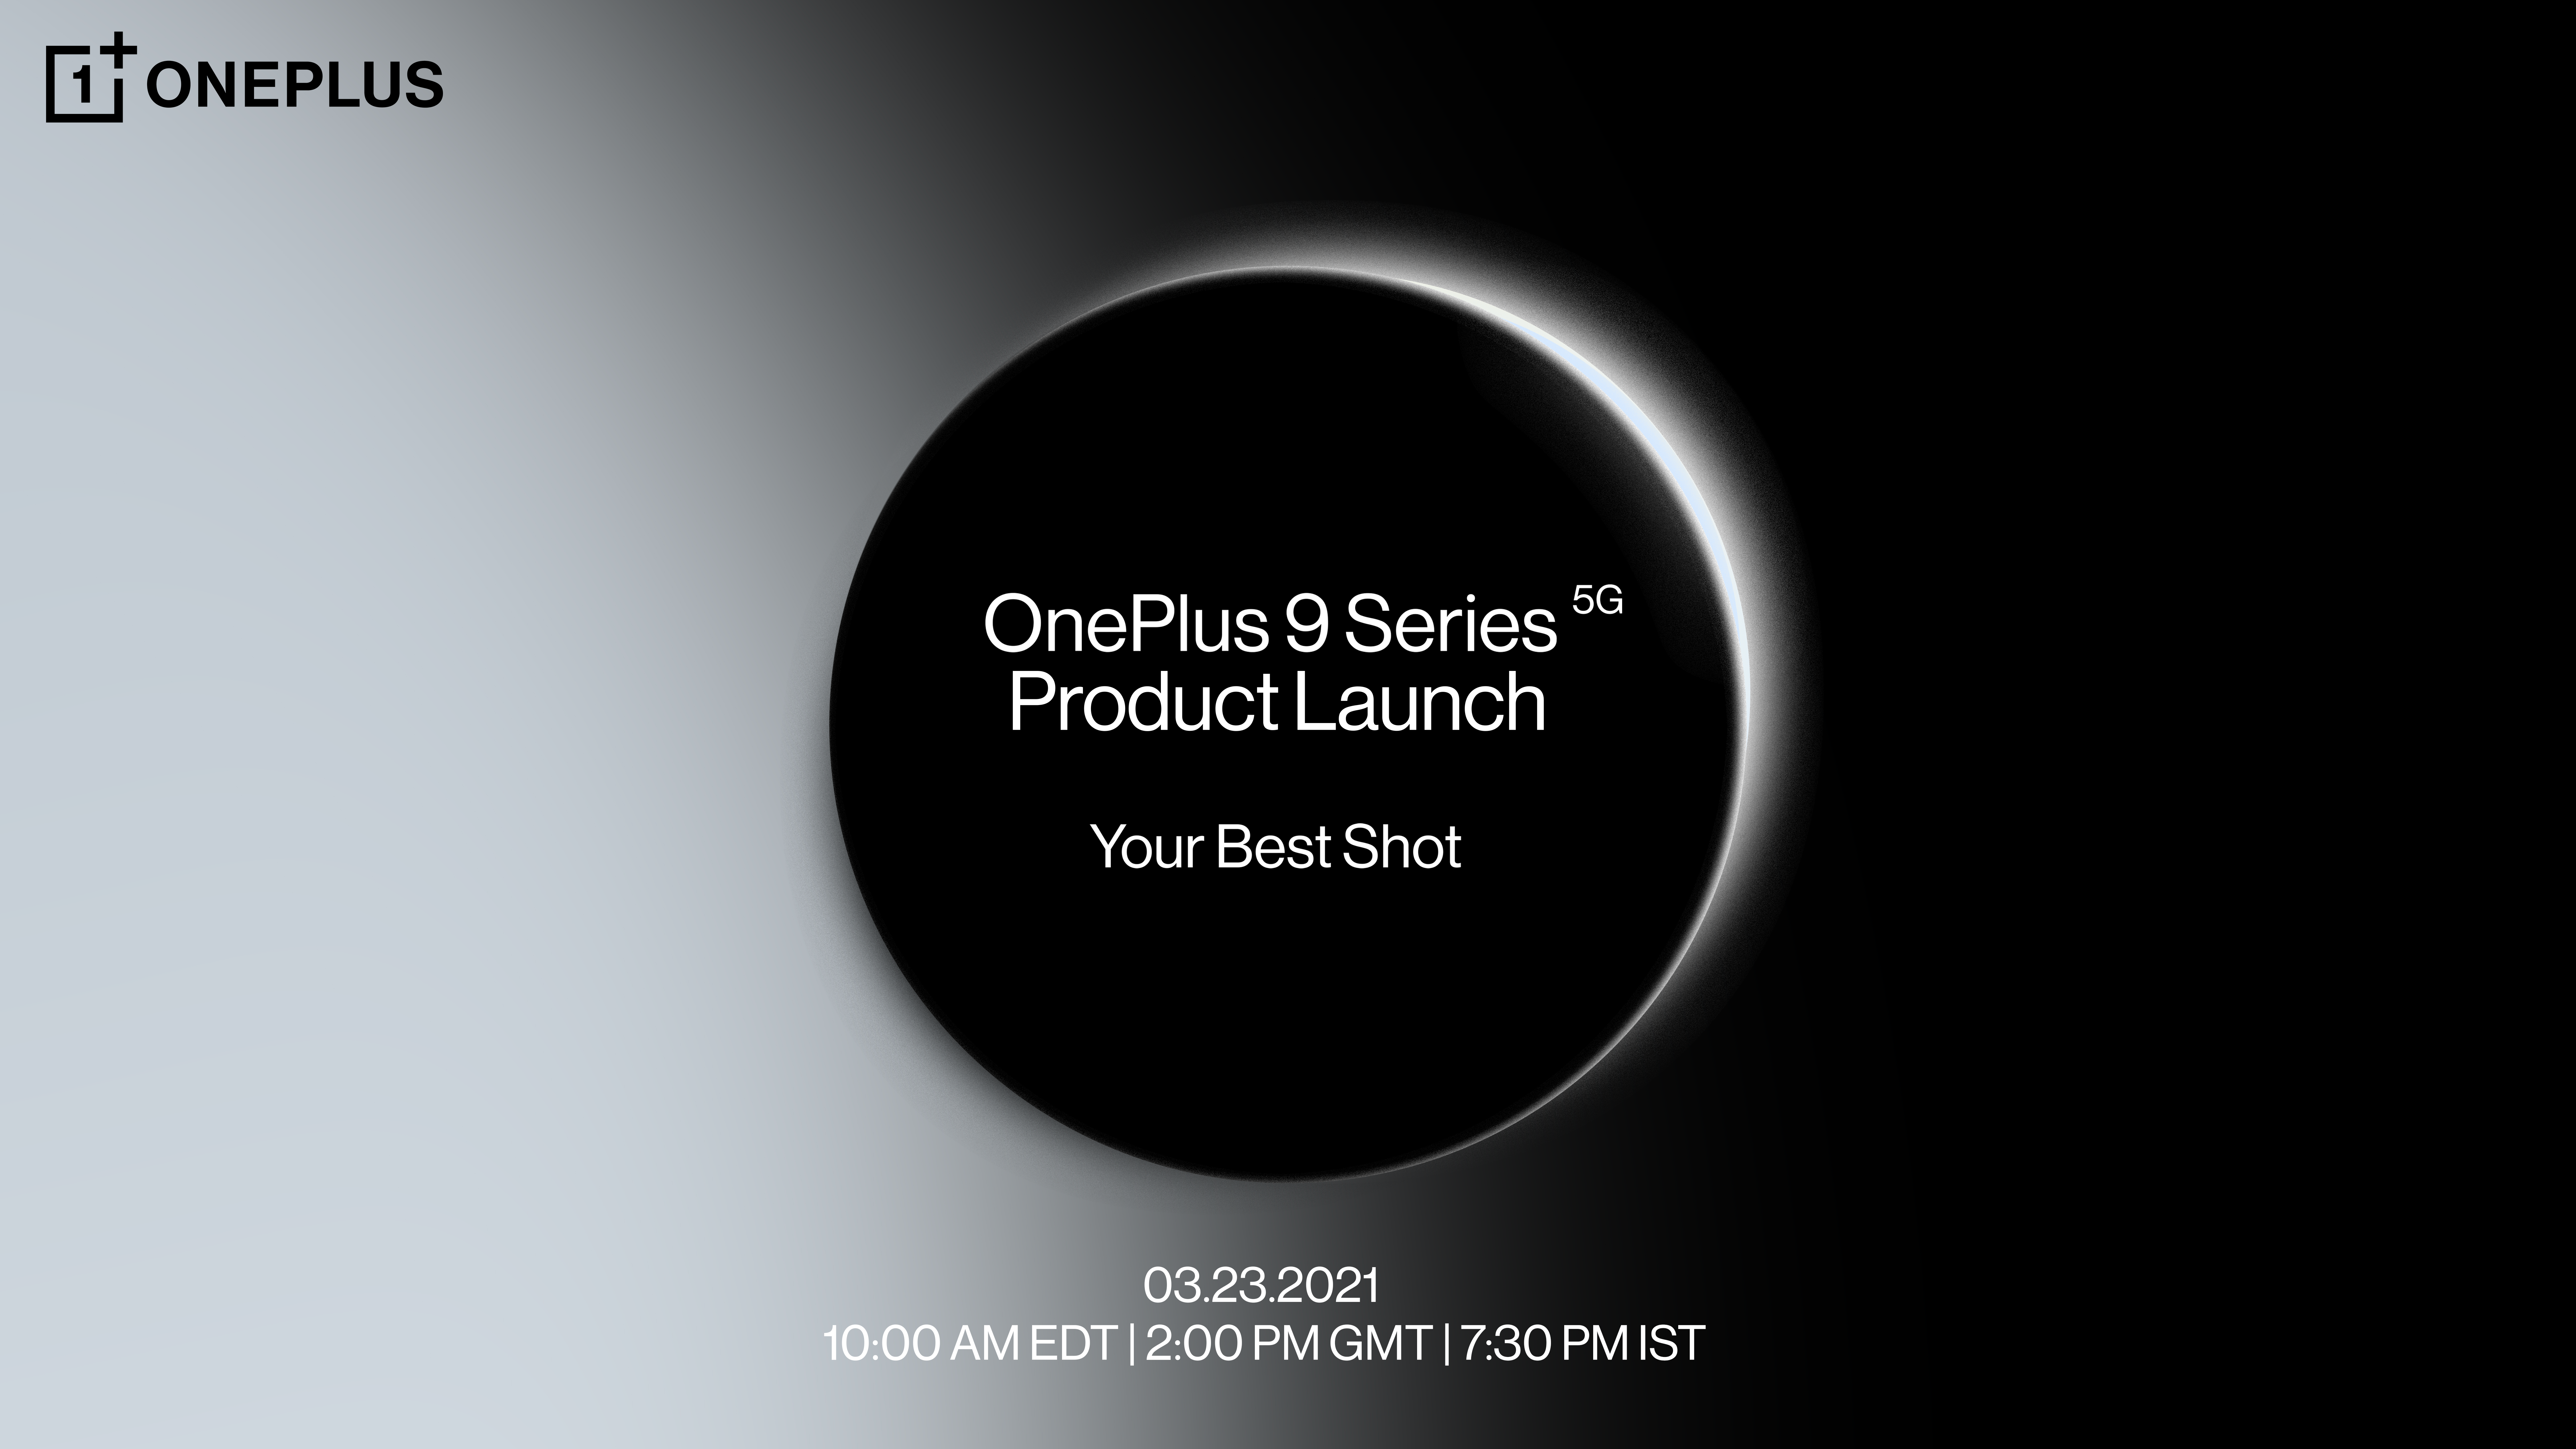 The OnePlus 9 series unveiling event is now official - Watch the OnePlus 9 event live stream here